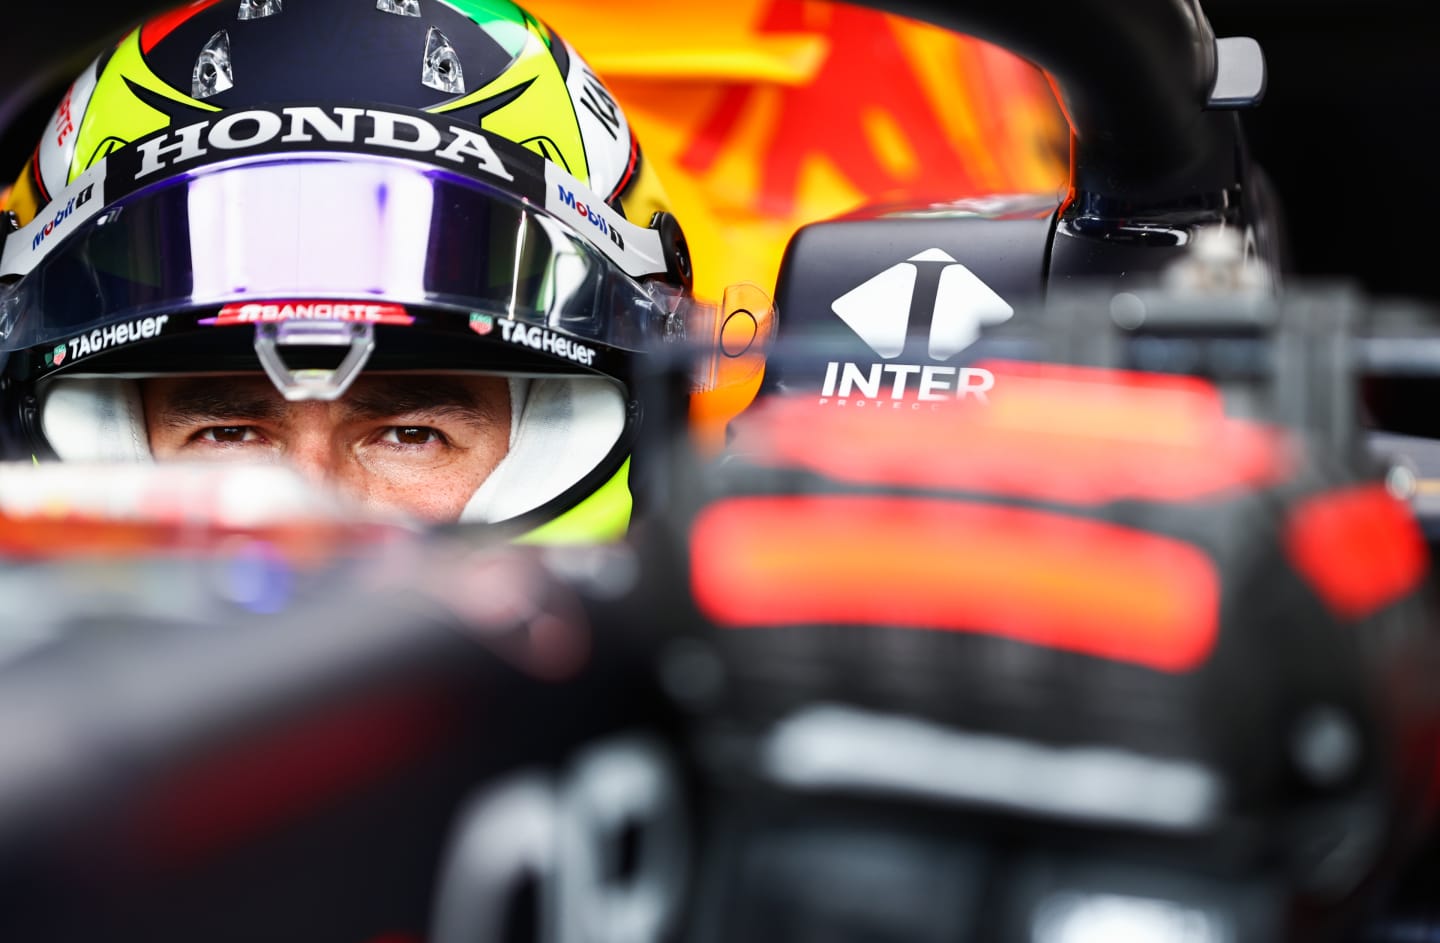 SAO PAULO, BRAZIL - NOVEMBER 13: Sergio Perez of Mexico and Red Bull Racing prepares to drive in the garage before the sprint ahead of the F1 Grand Prix of Brazil at Autodromo Jose Carlos Pace on November 13, 2021 in Sao Paulo, Brazil. (Photo by Mark Thompson/Getty Images)